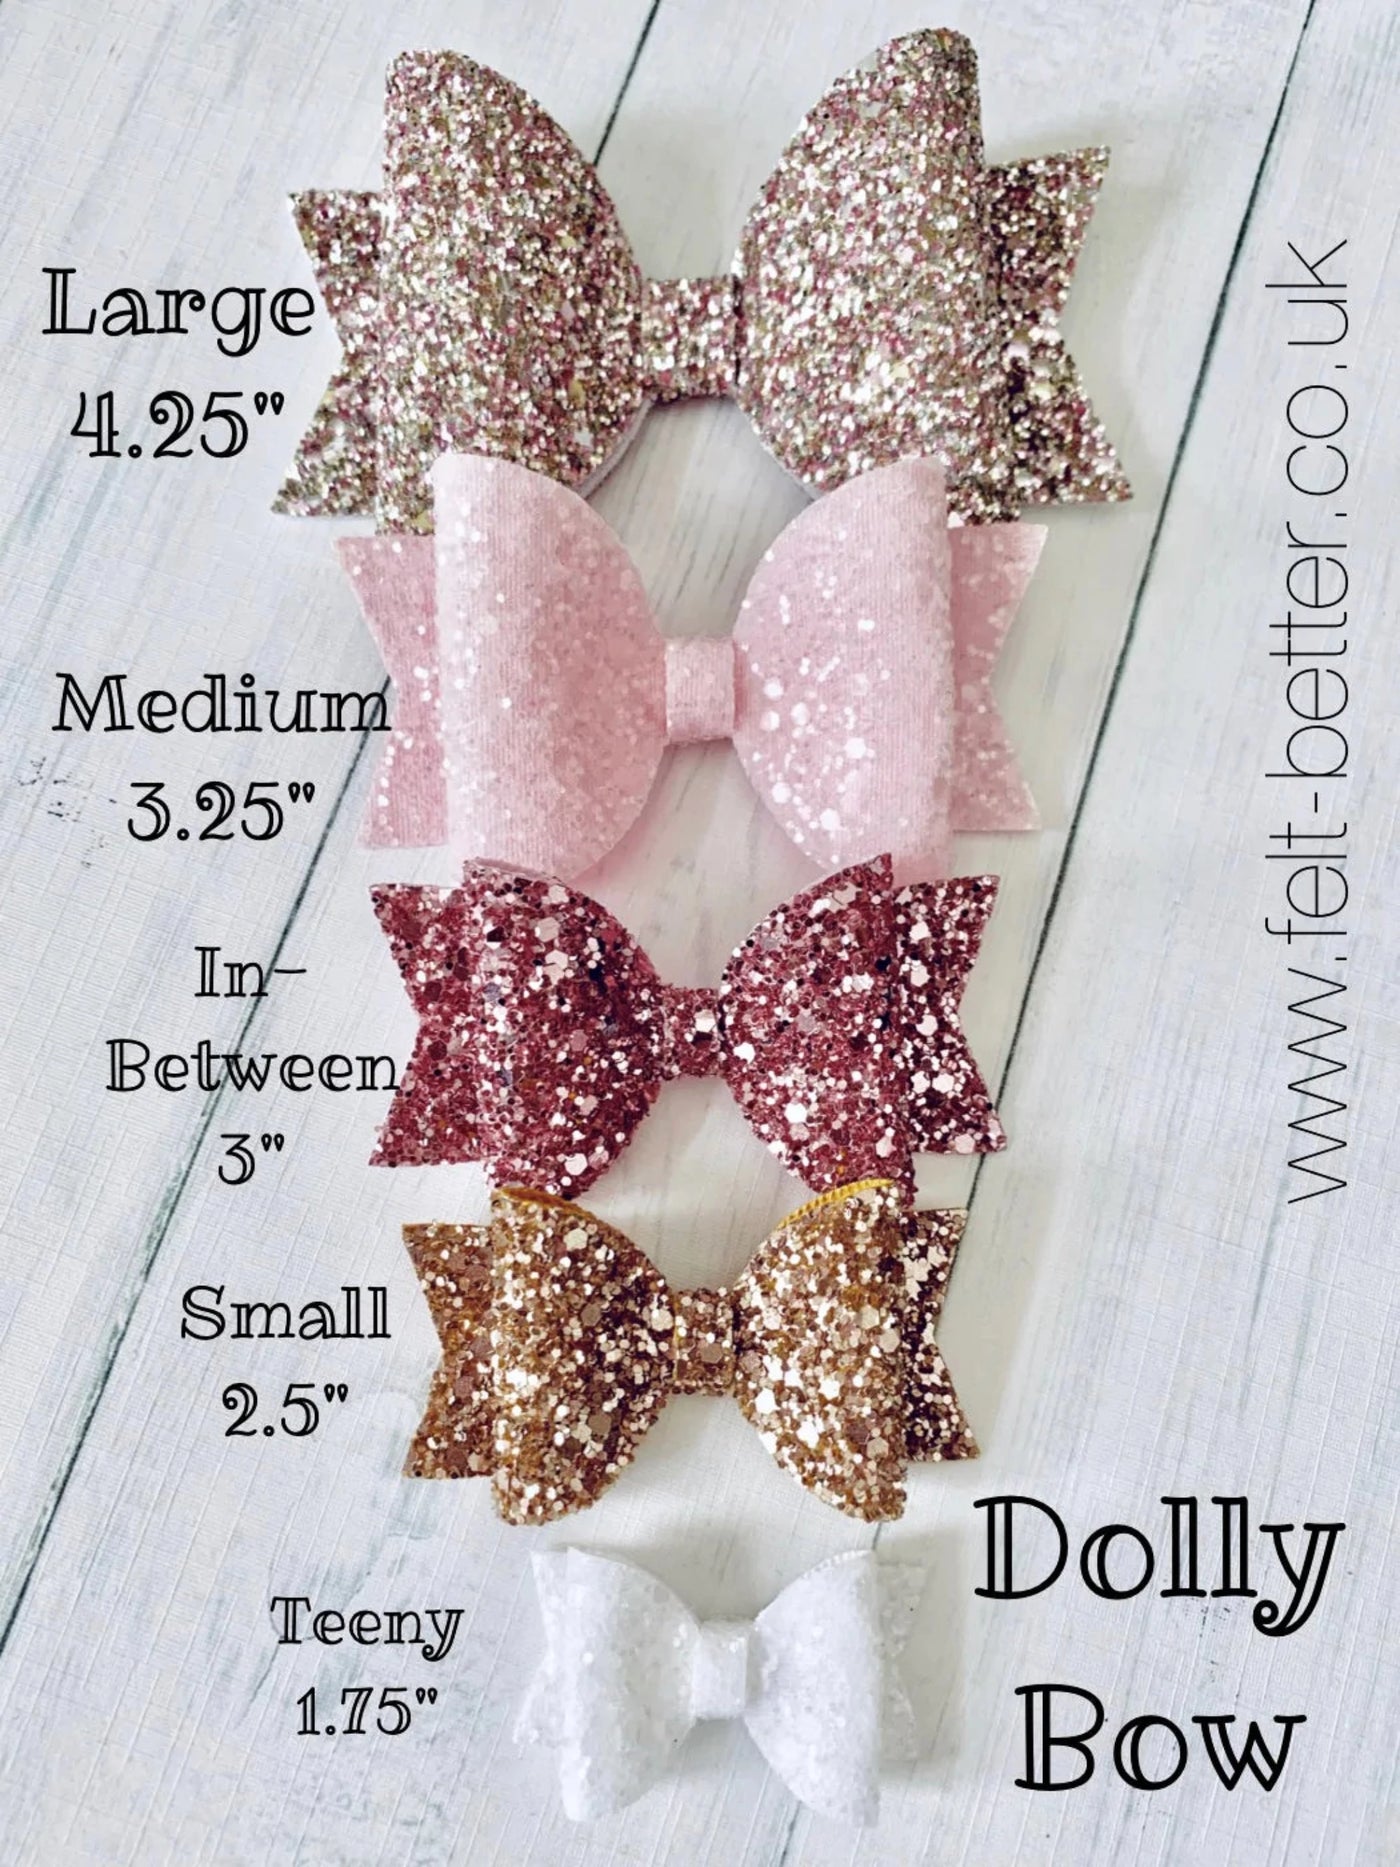 Felt Better 'Special Edition' Dolly Bow 3.5” and 4” Combo Die - Two in One